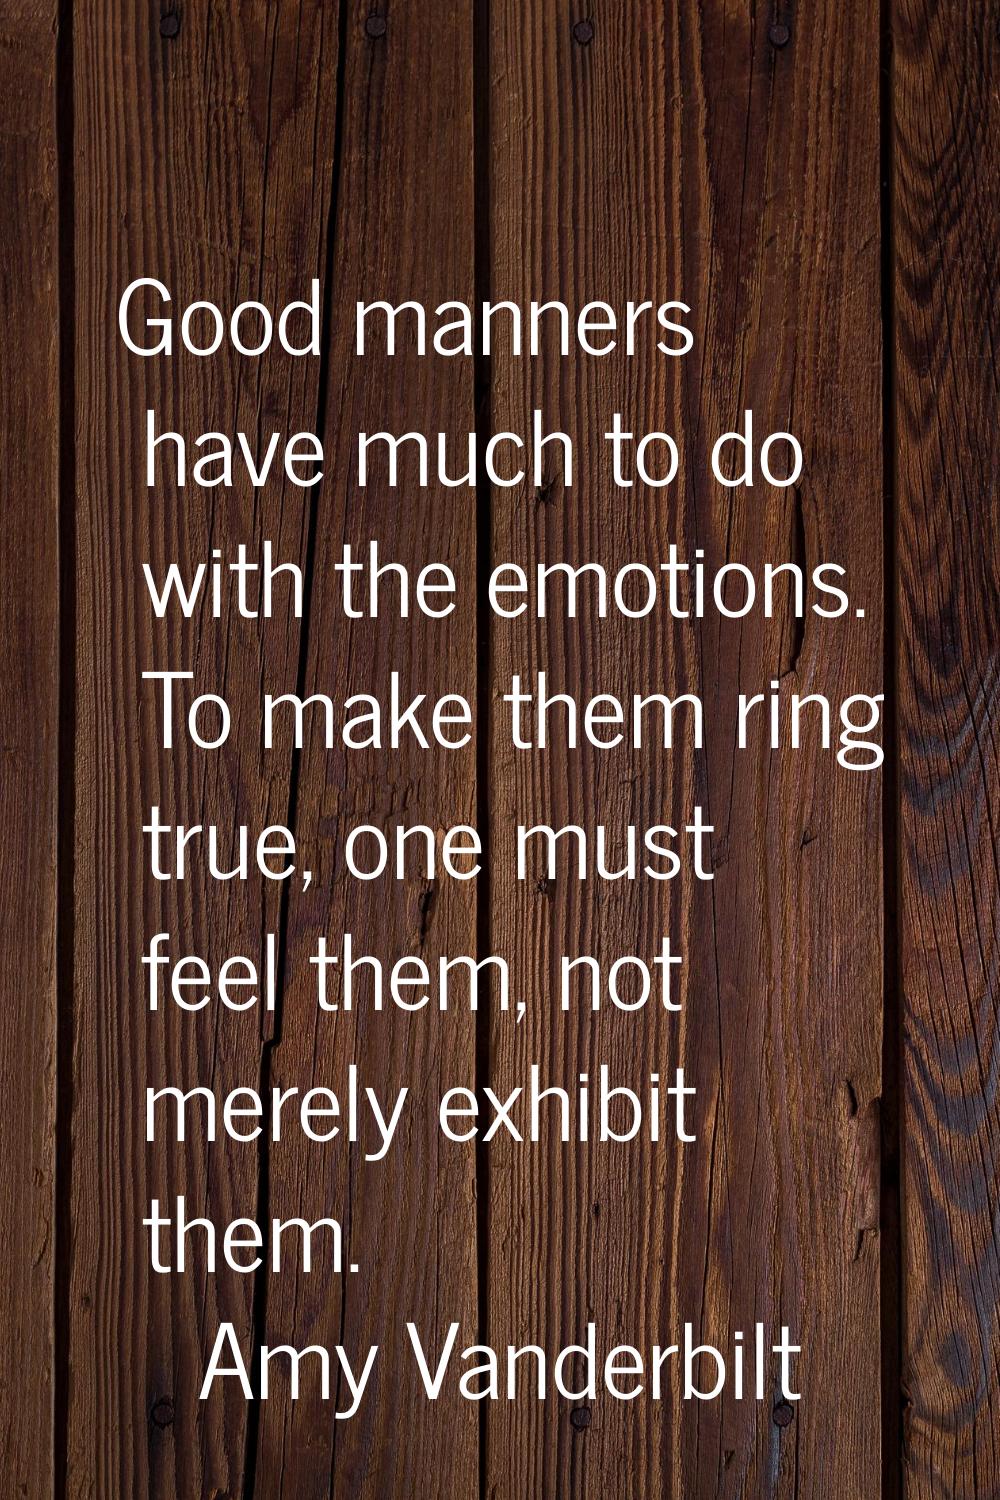 Good manners have much to do with the emotions. To make them ring true, one must feel them, not mer